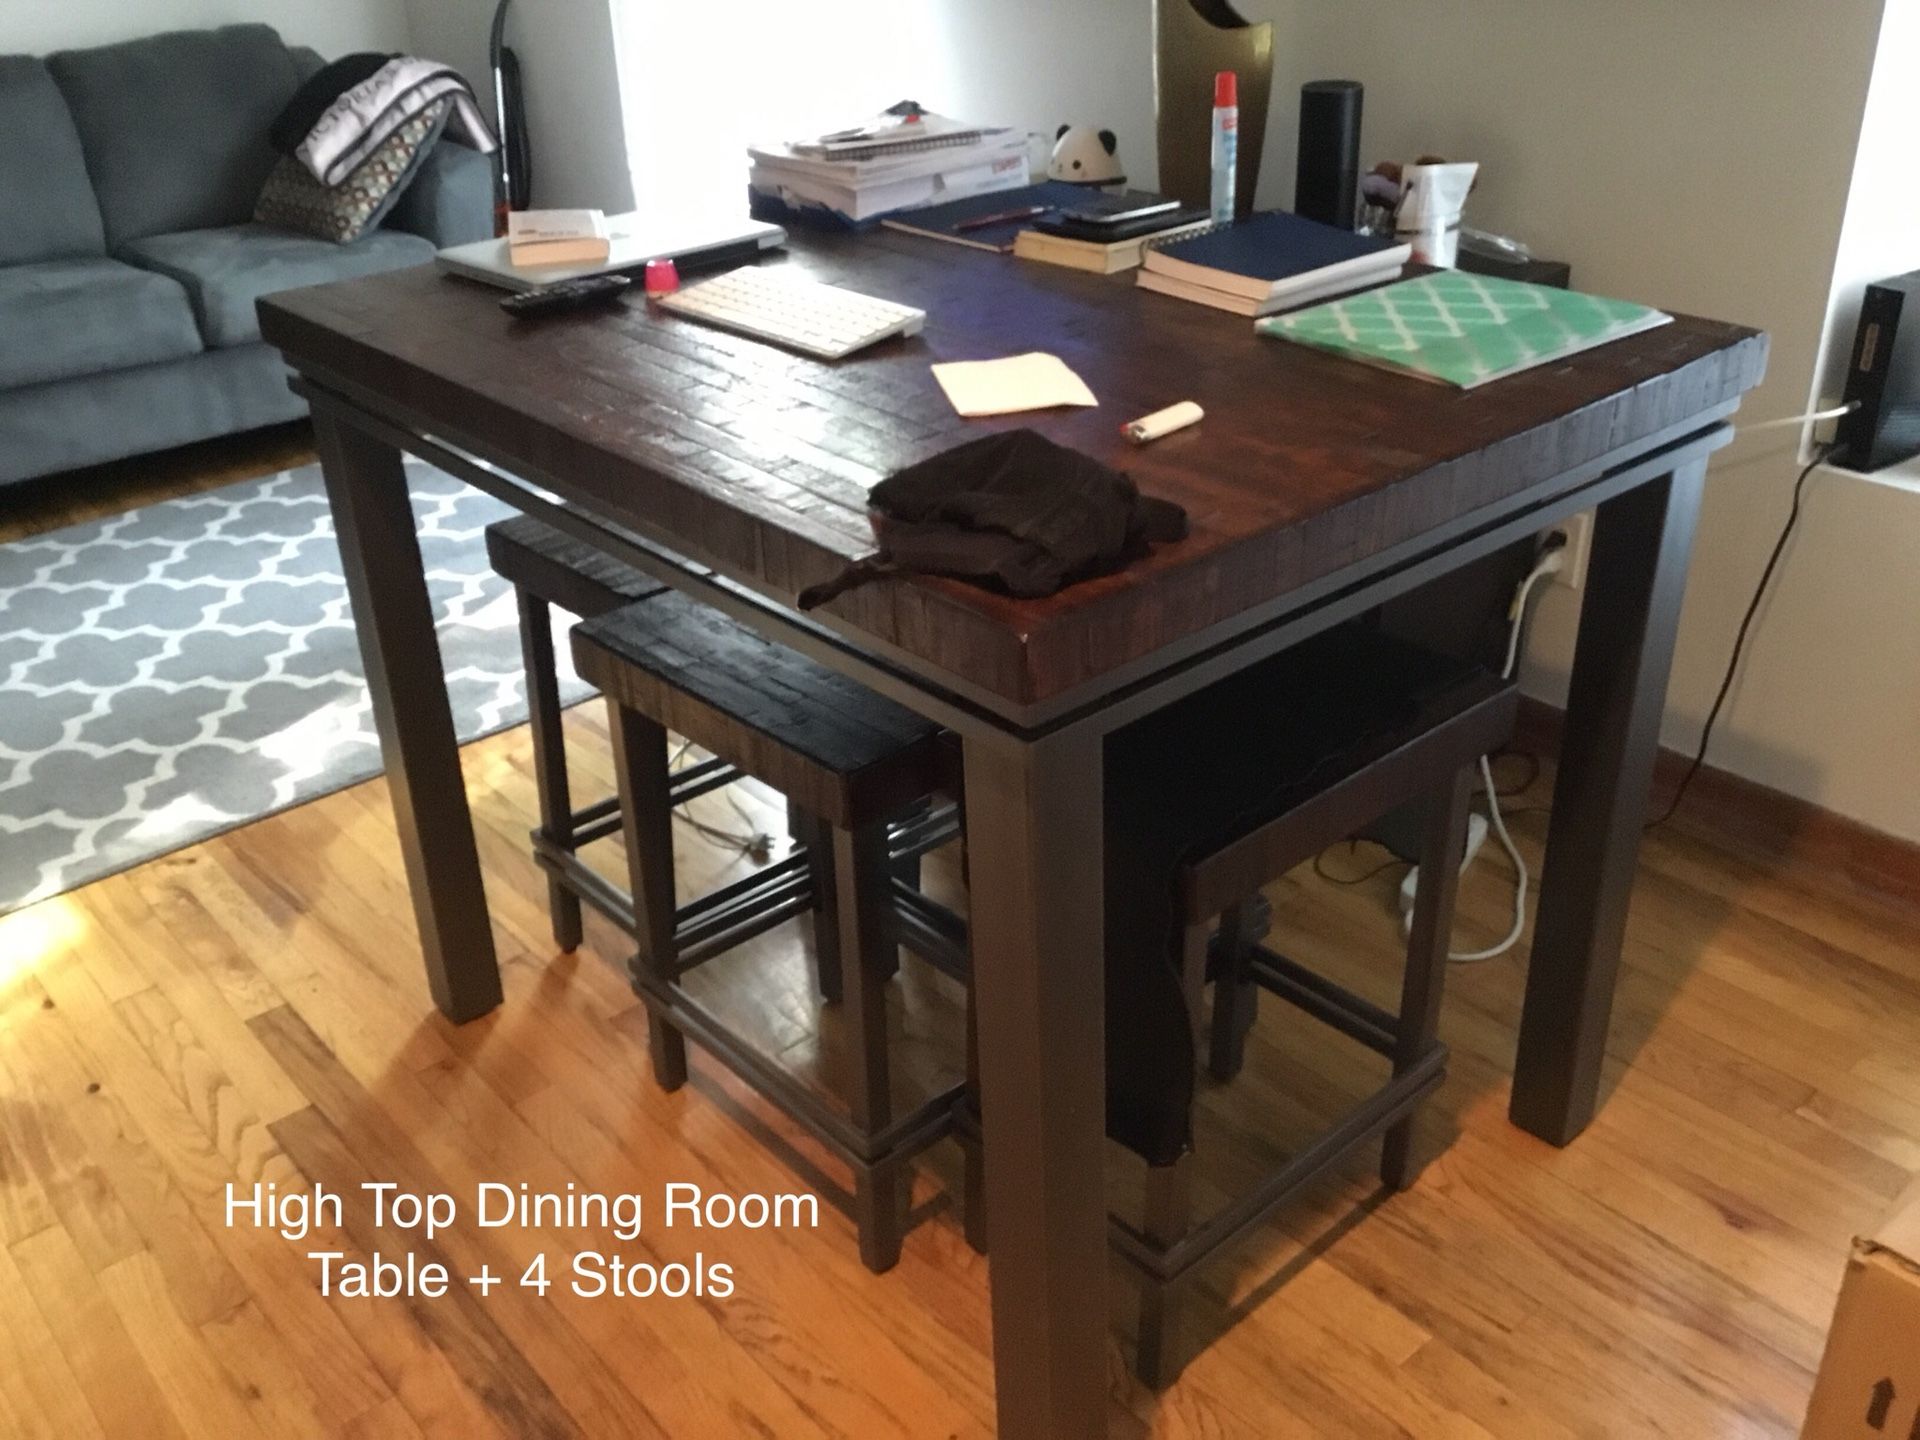 Raymour and Flanigan Table and 4 Stools